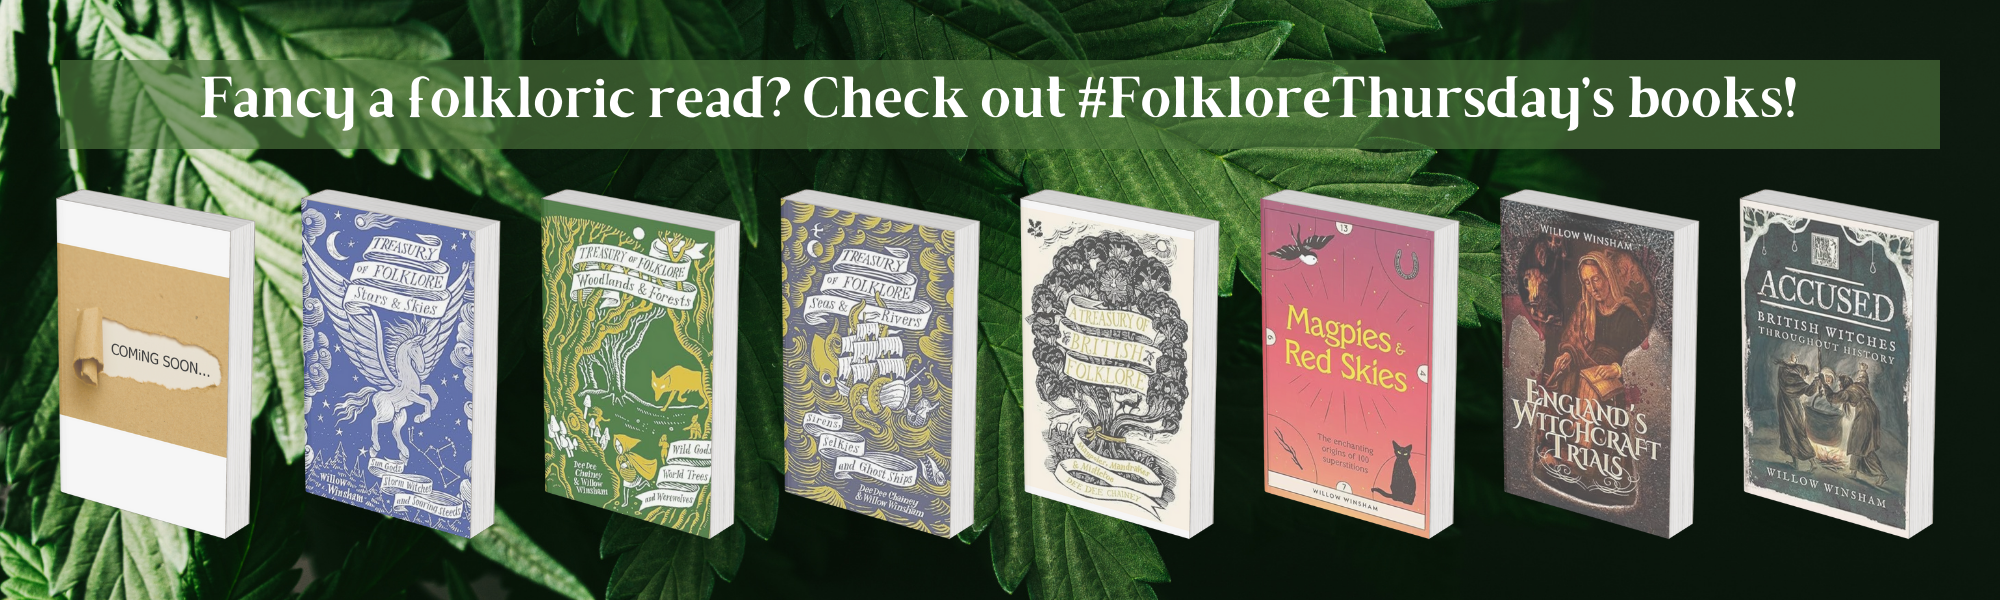 Fancy a folkloric read? Check out FolkloreThursday's books!